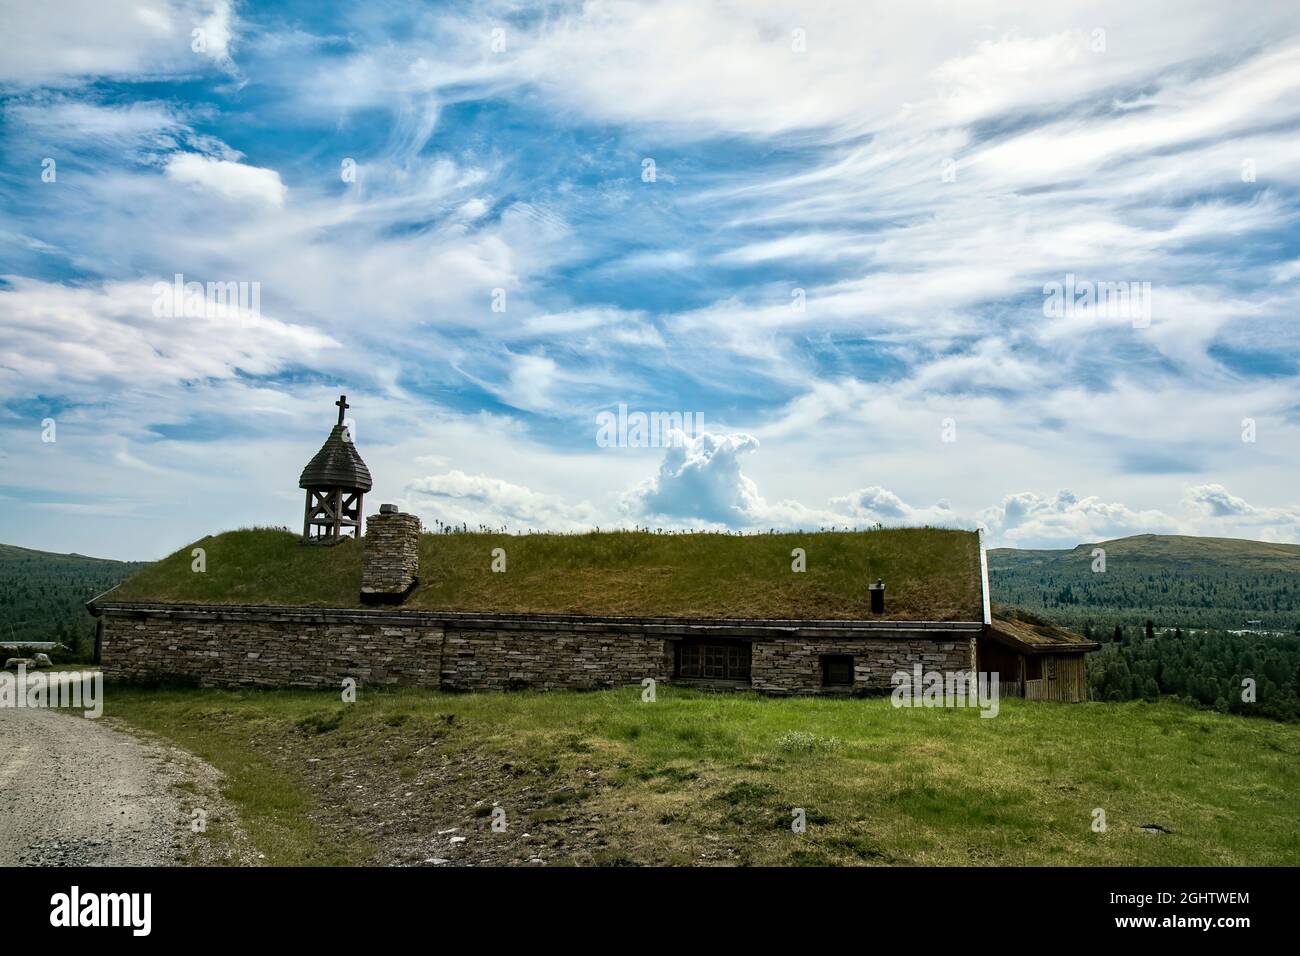 Old church with grass roof in the mountains in Norway Stock Photo